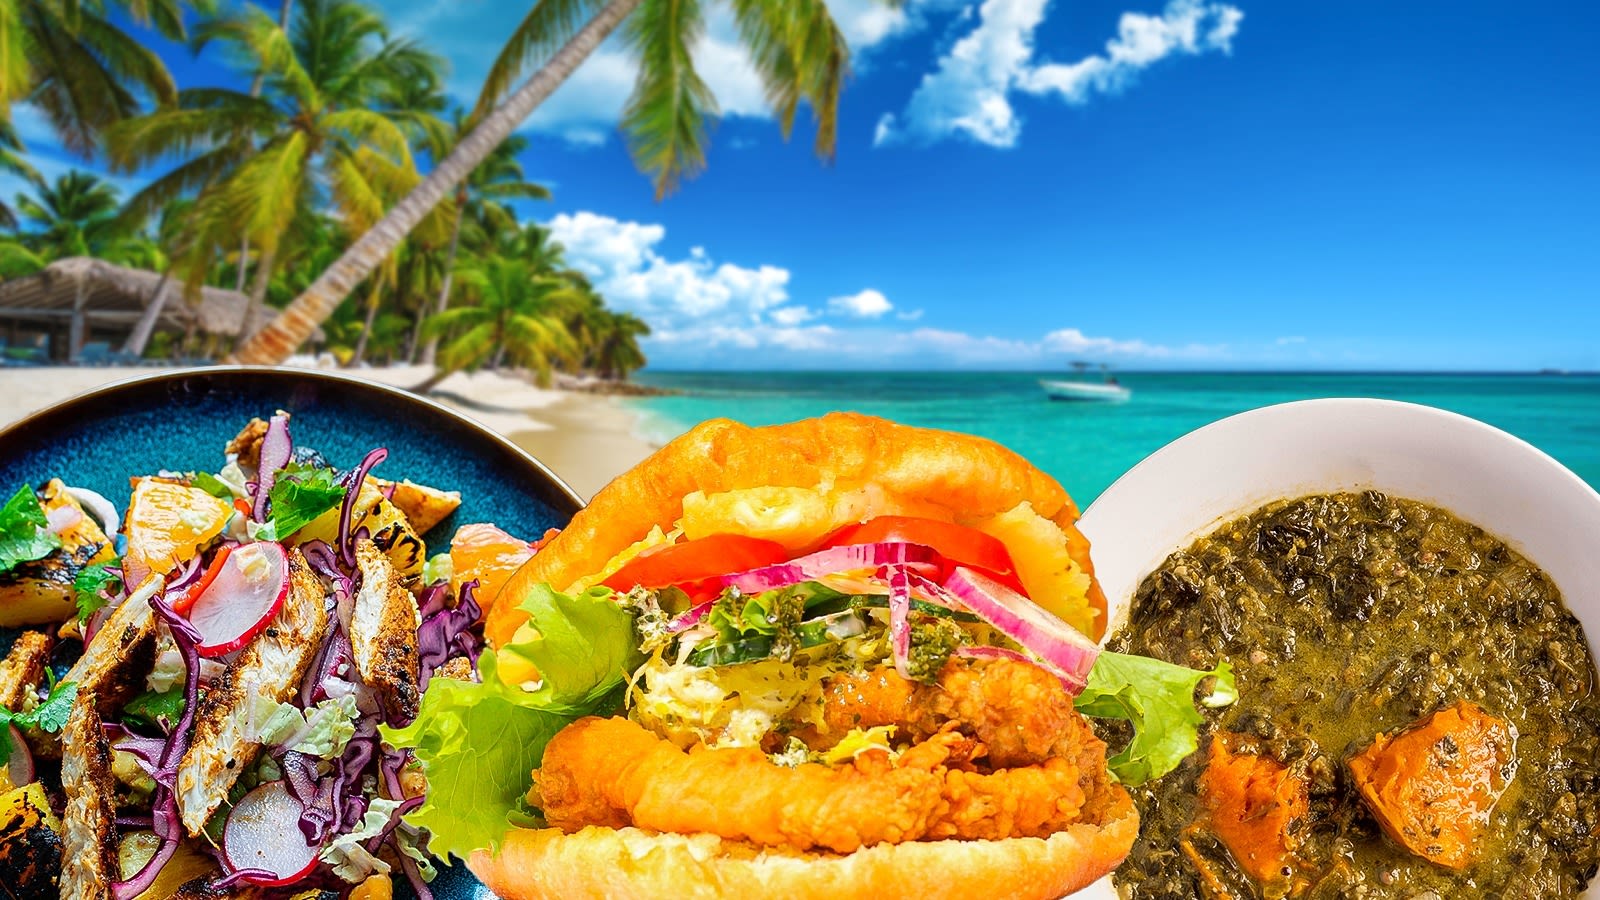 15 Caribbean Dishes You Have To Try, According To A Top Chef Guest Judge